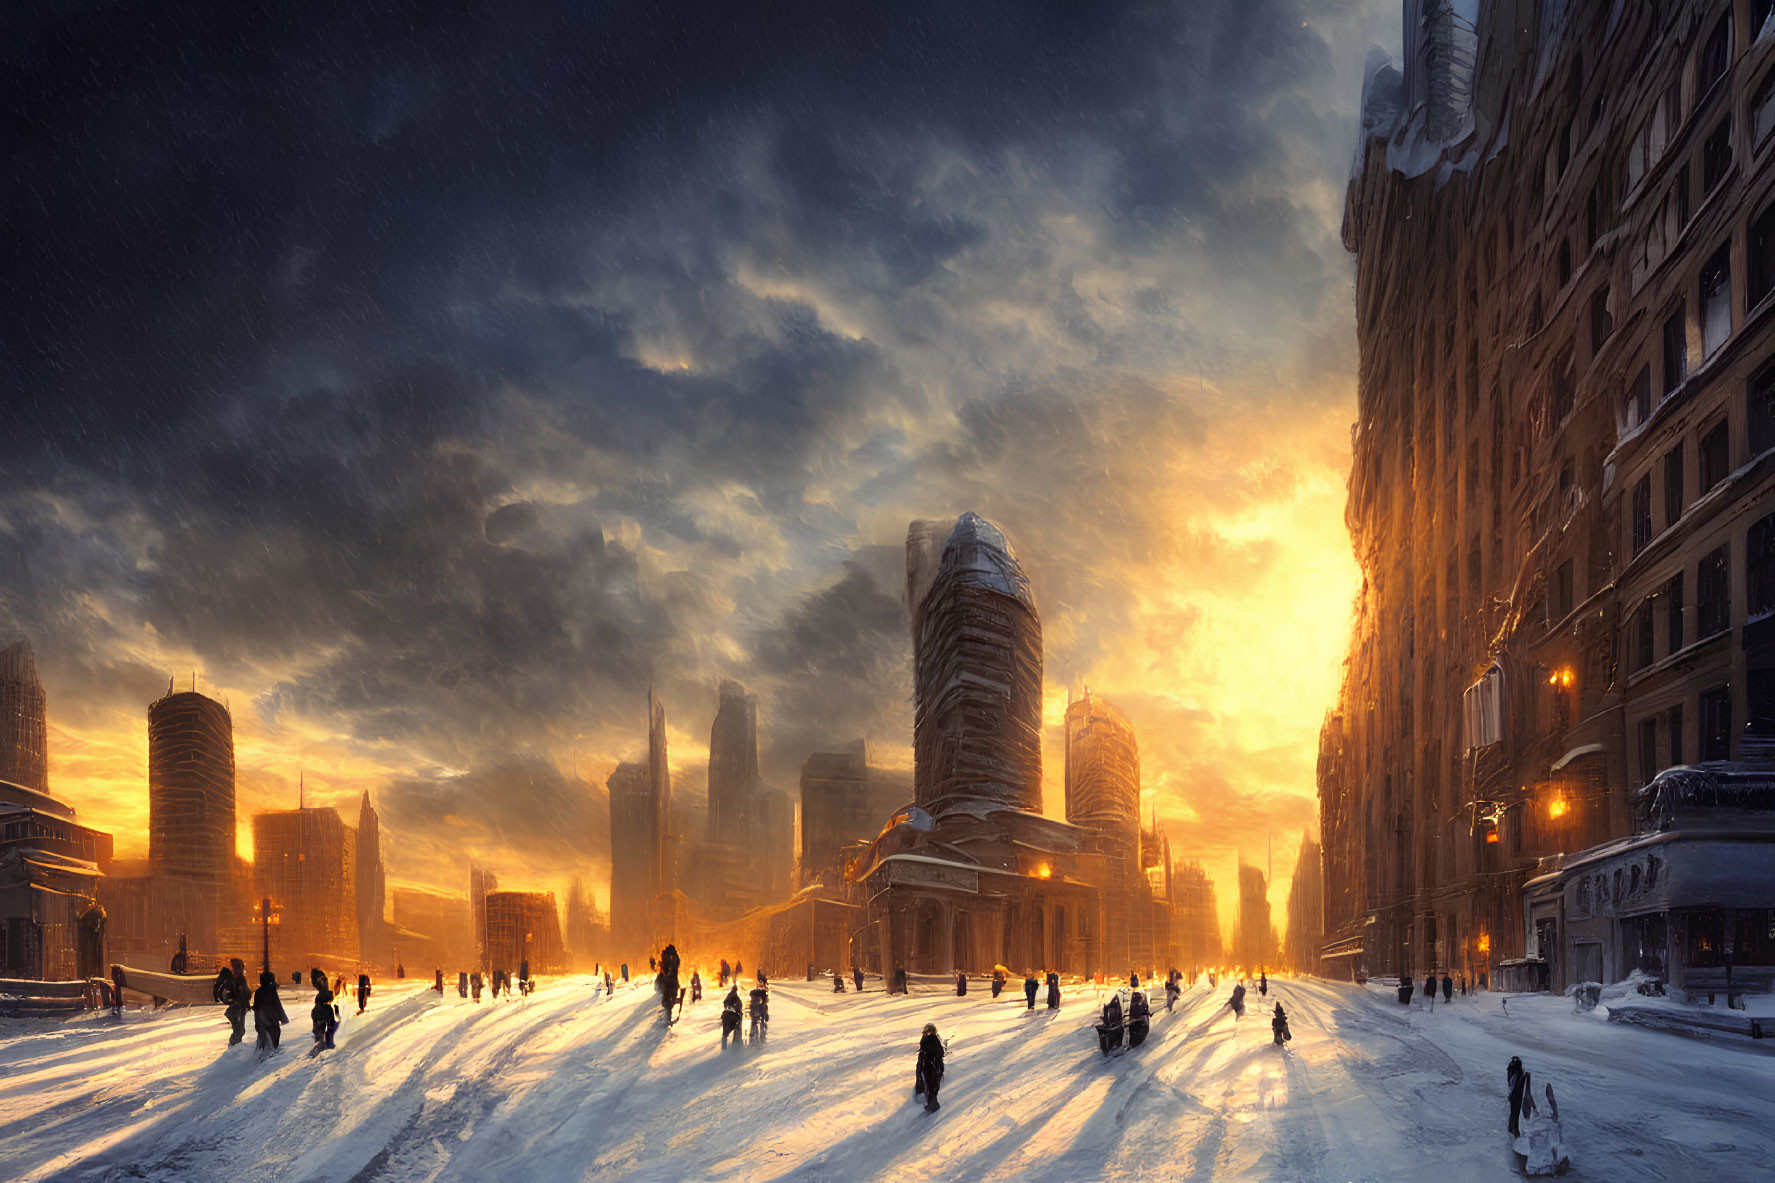 Snow-covered cityscape at sunset with people walking, tall futuristic buildings, and dark clouds.